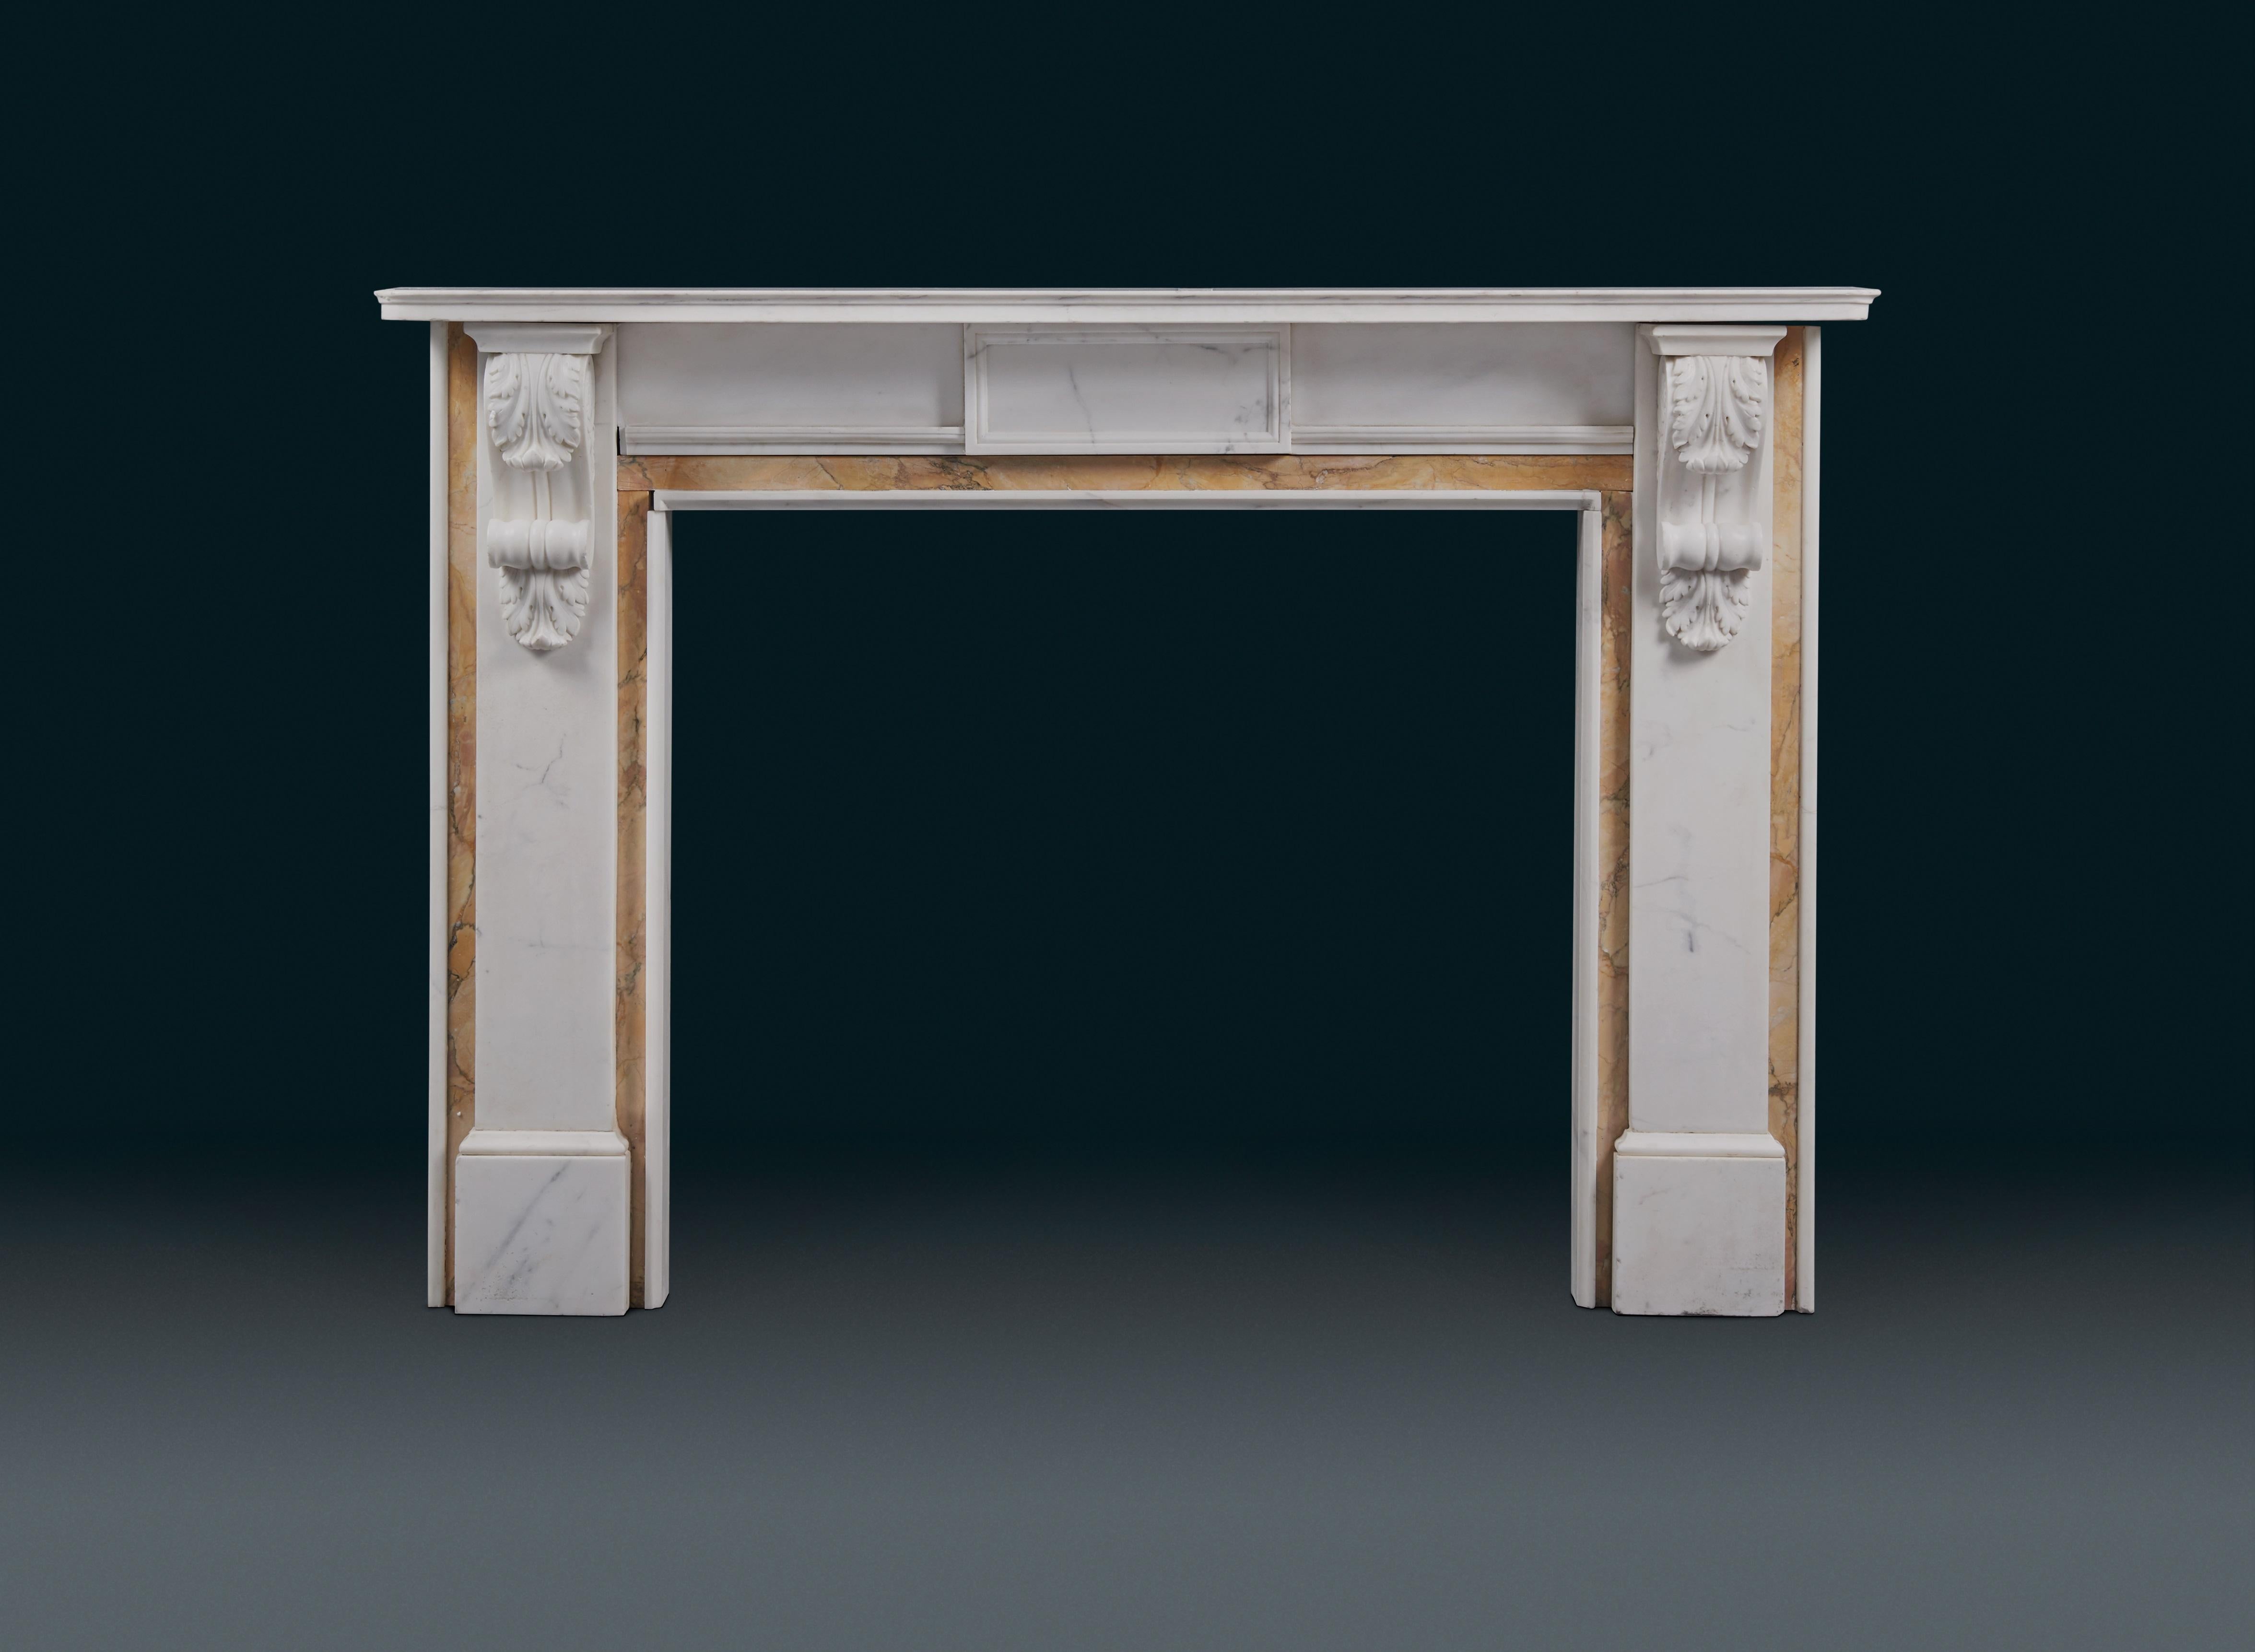 A 19th century, antique Victorian Siena and veined marble fireplace, the rectangular shelf with rounded corners above the panelled frieze, the pilaster jambs headed with ogee acanthus decorated brackets, the opening framed by Siena edged in white